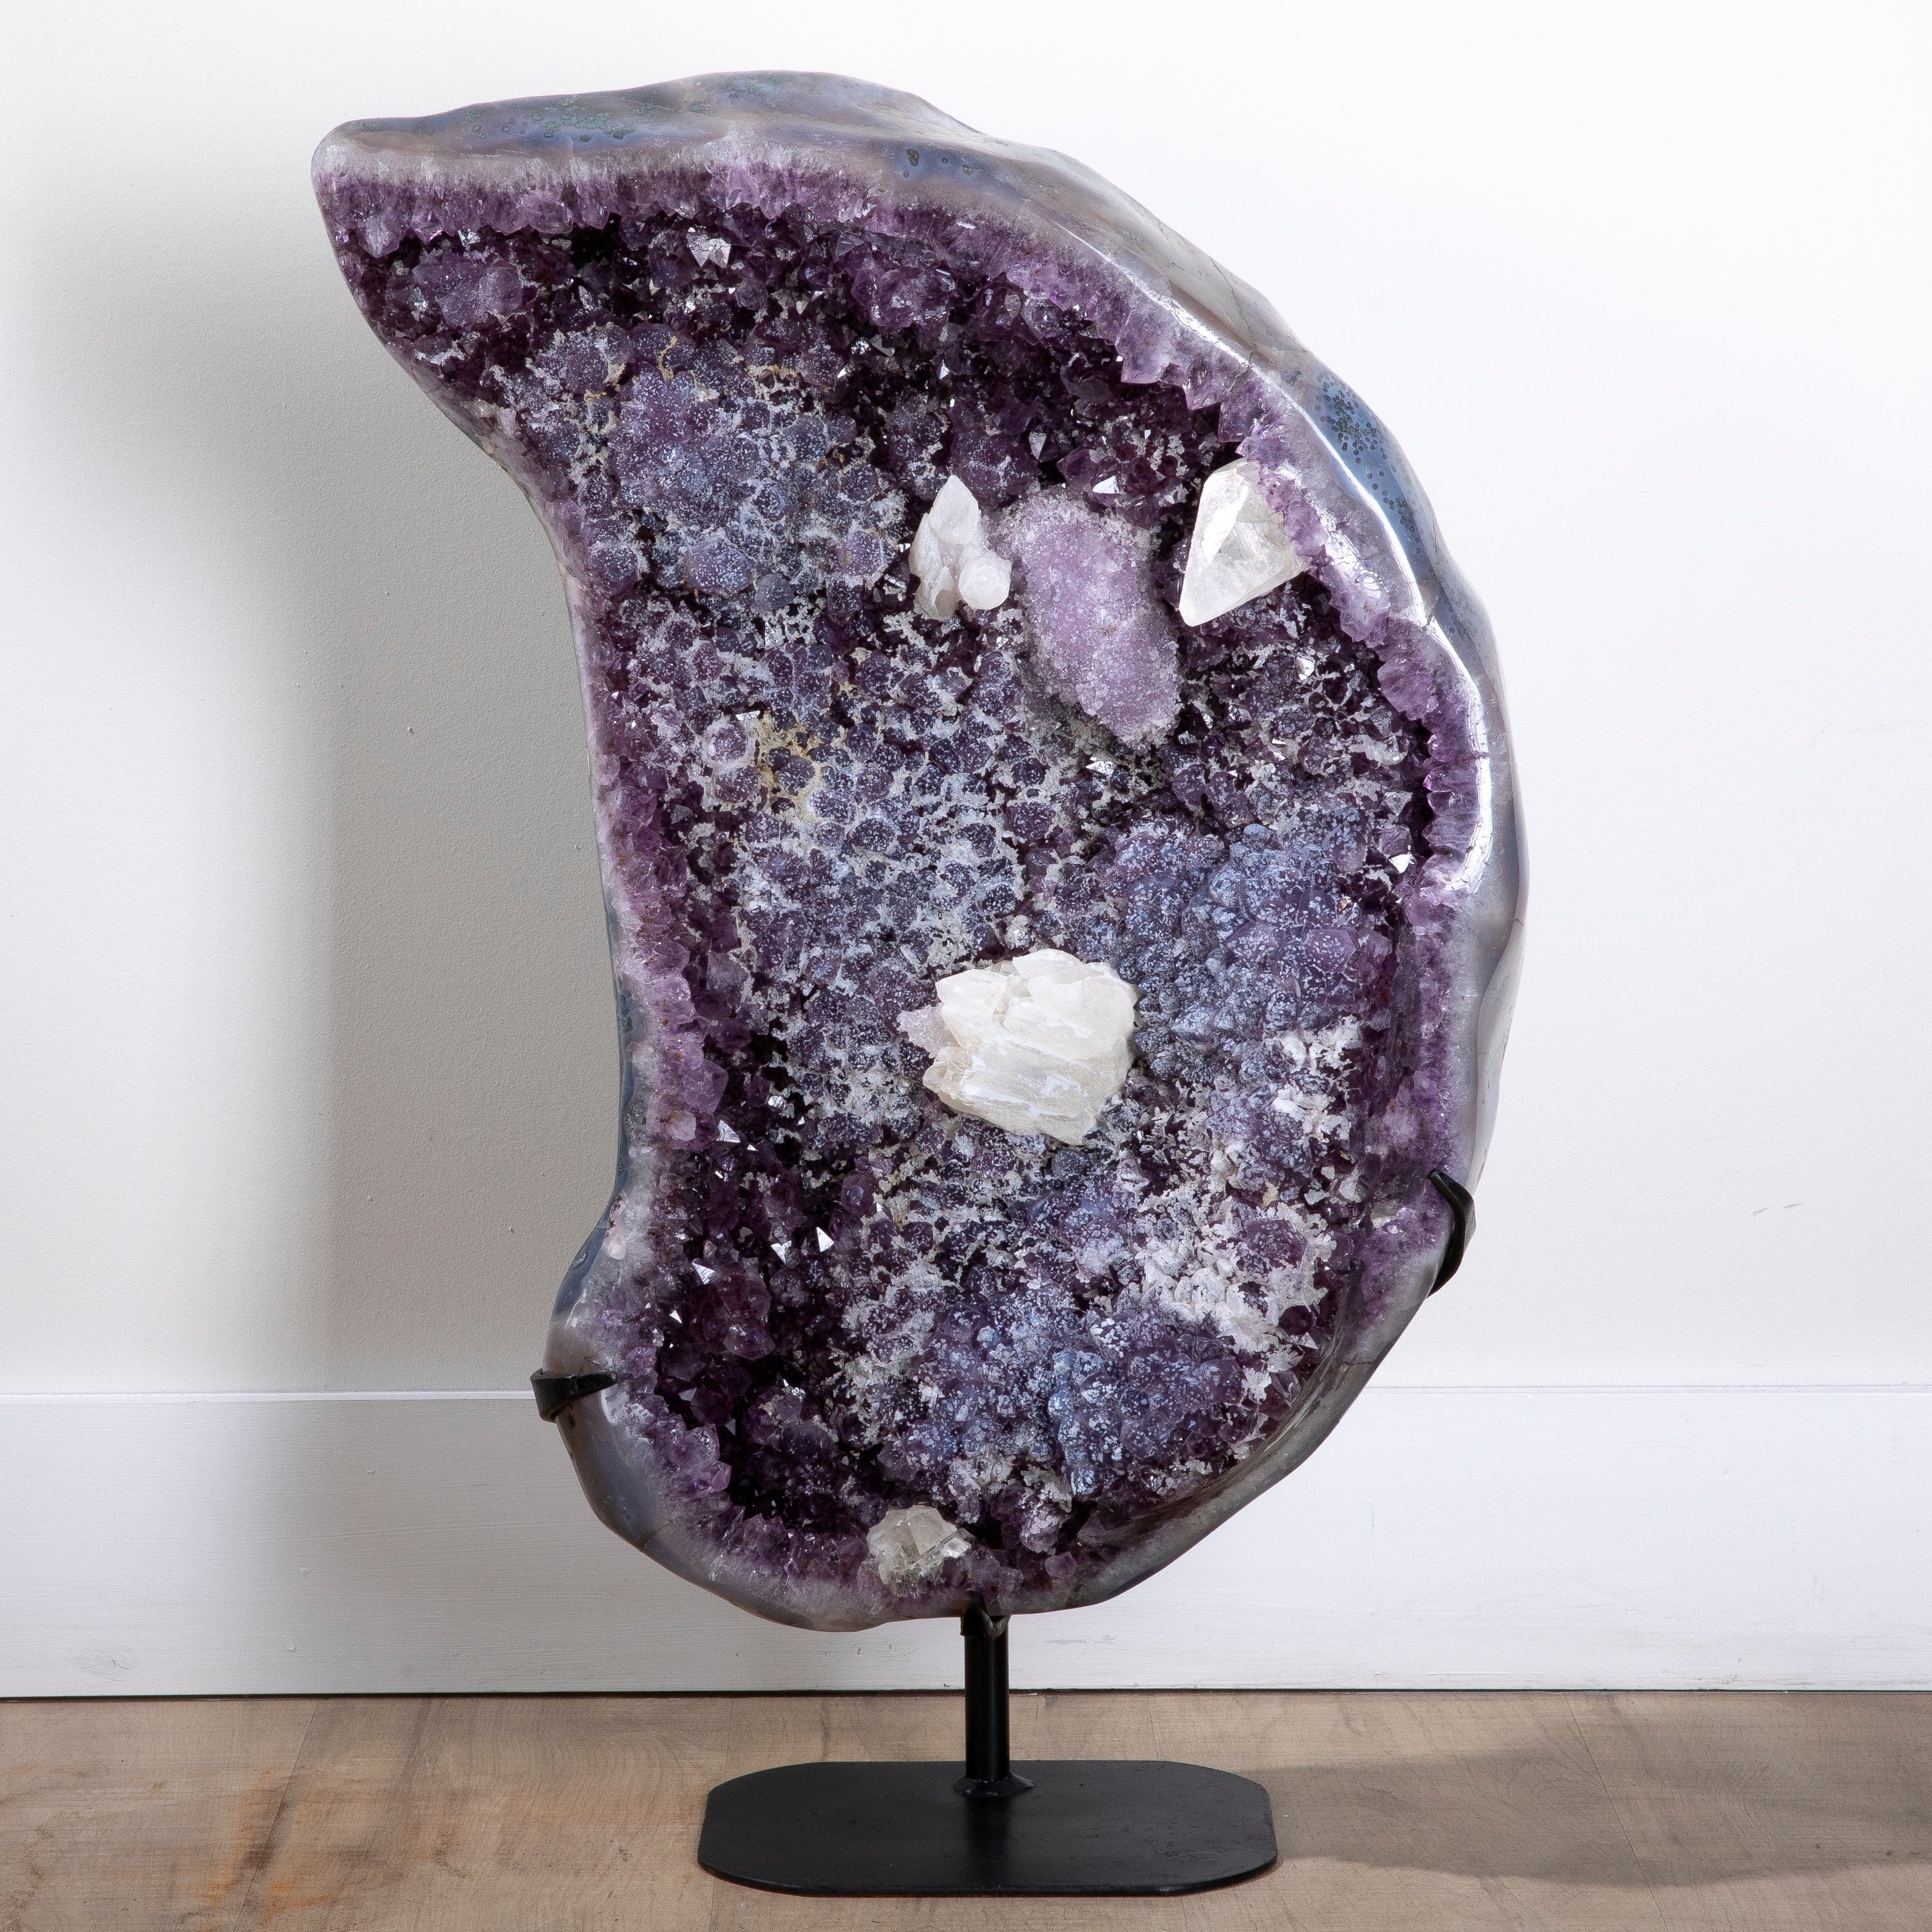 Kalifano Amethyst Amethyst Geode (Naturally formed Moon) with Calcite on Custom Stand- 30" / 90lbs BAG14000.010